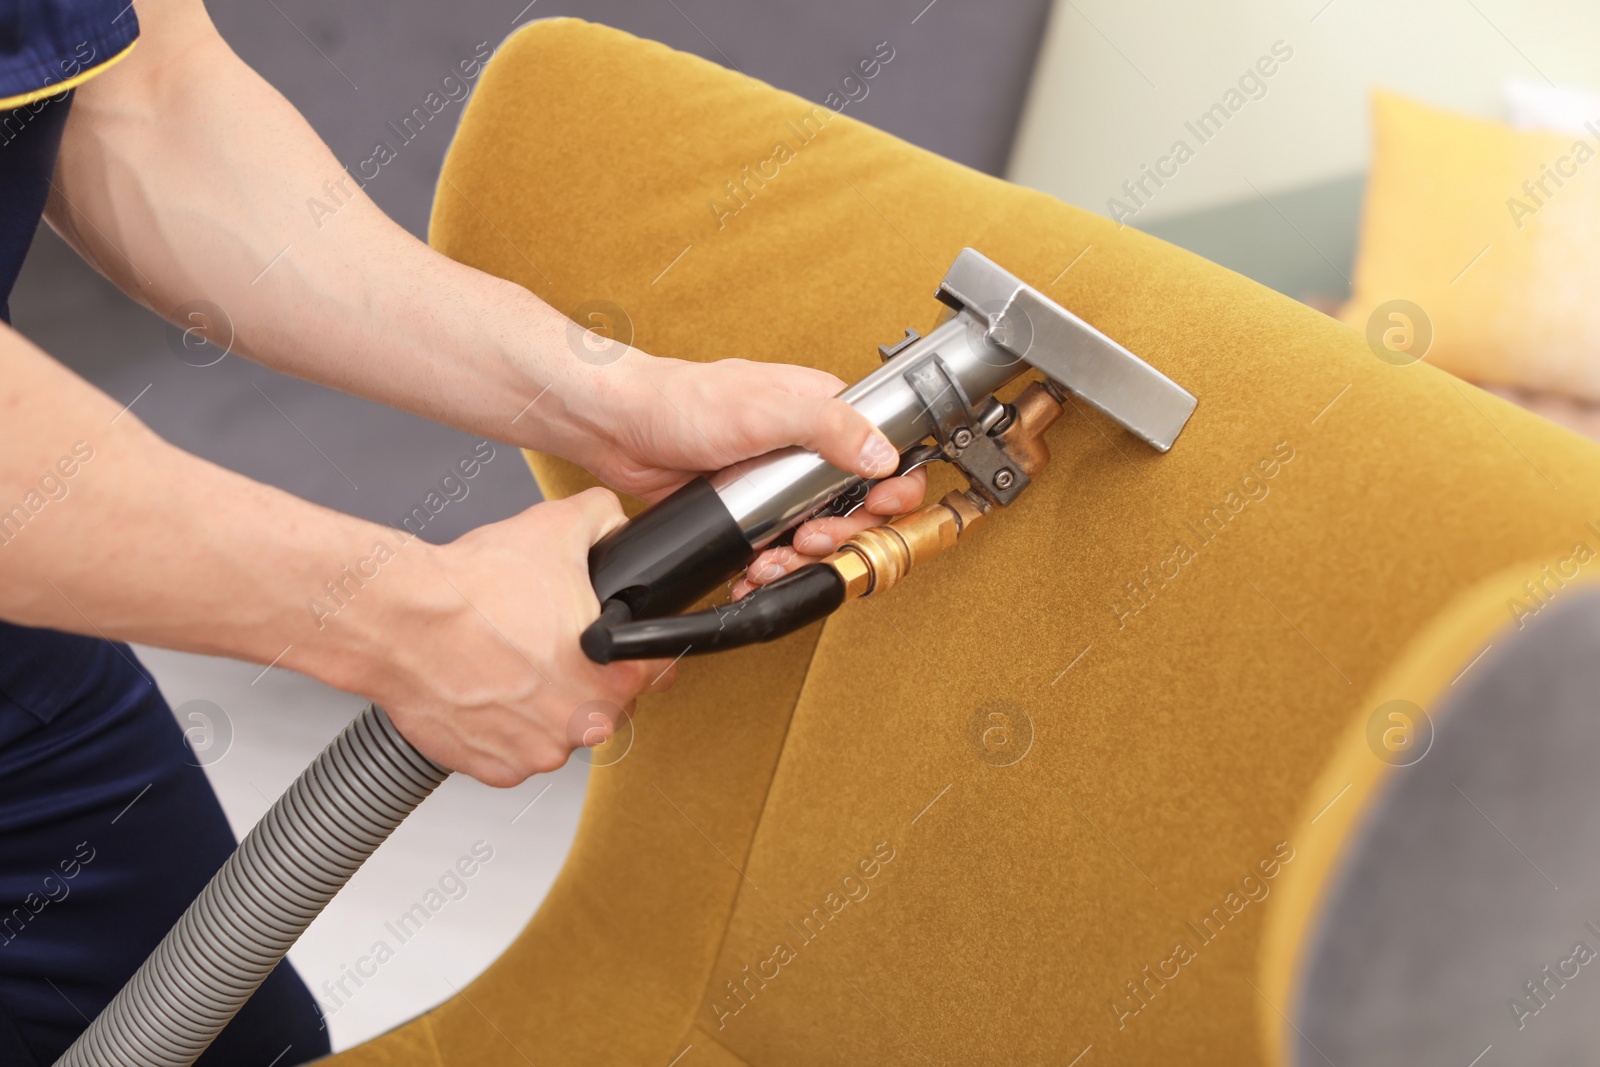 Photo of Male worker removing dirt from armchair with professional vacuum cleaner indoors, closeup